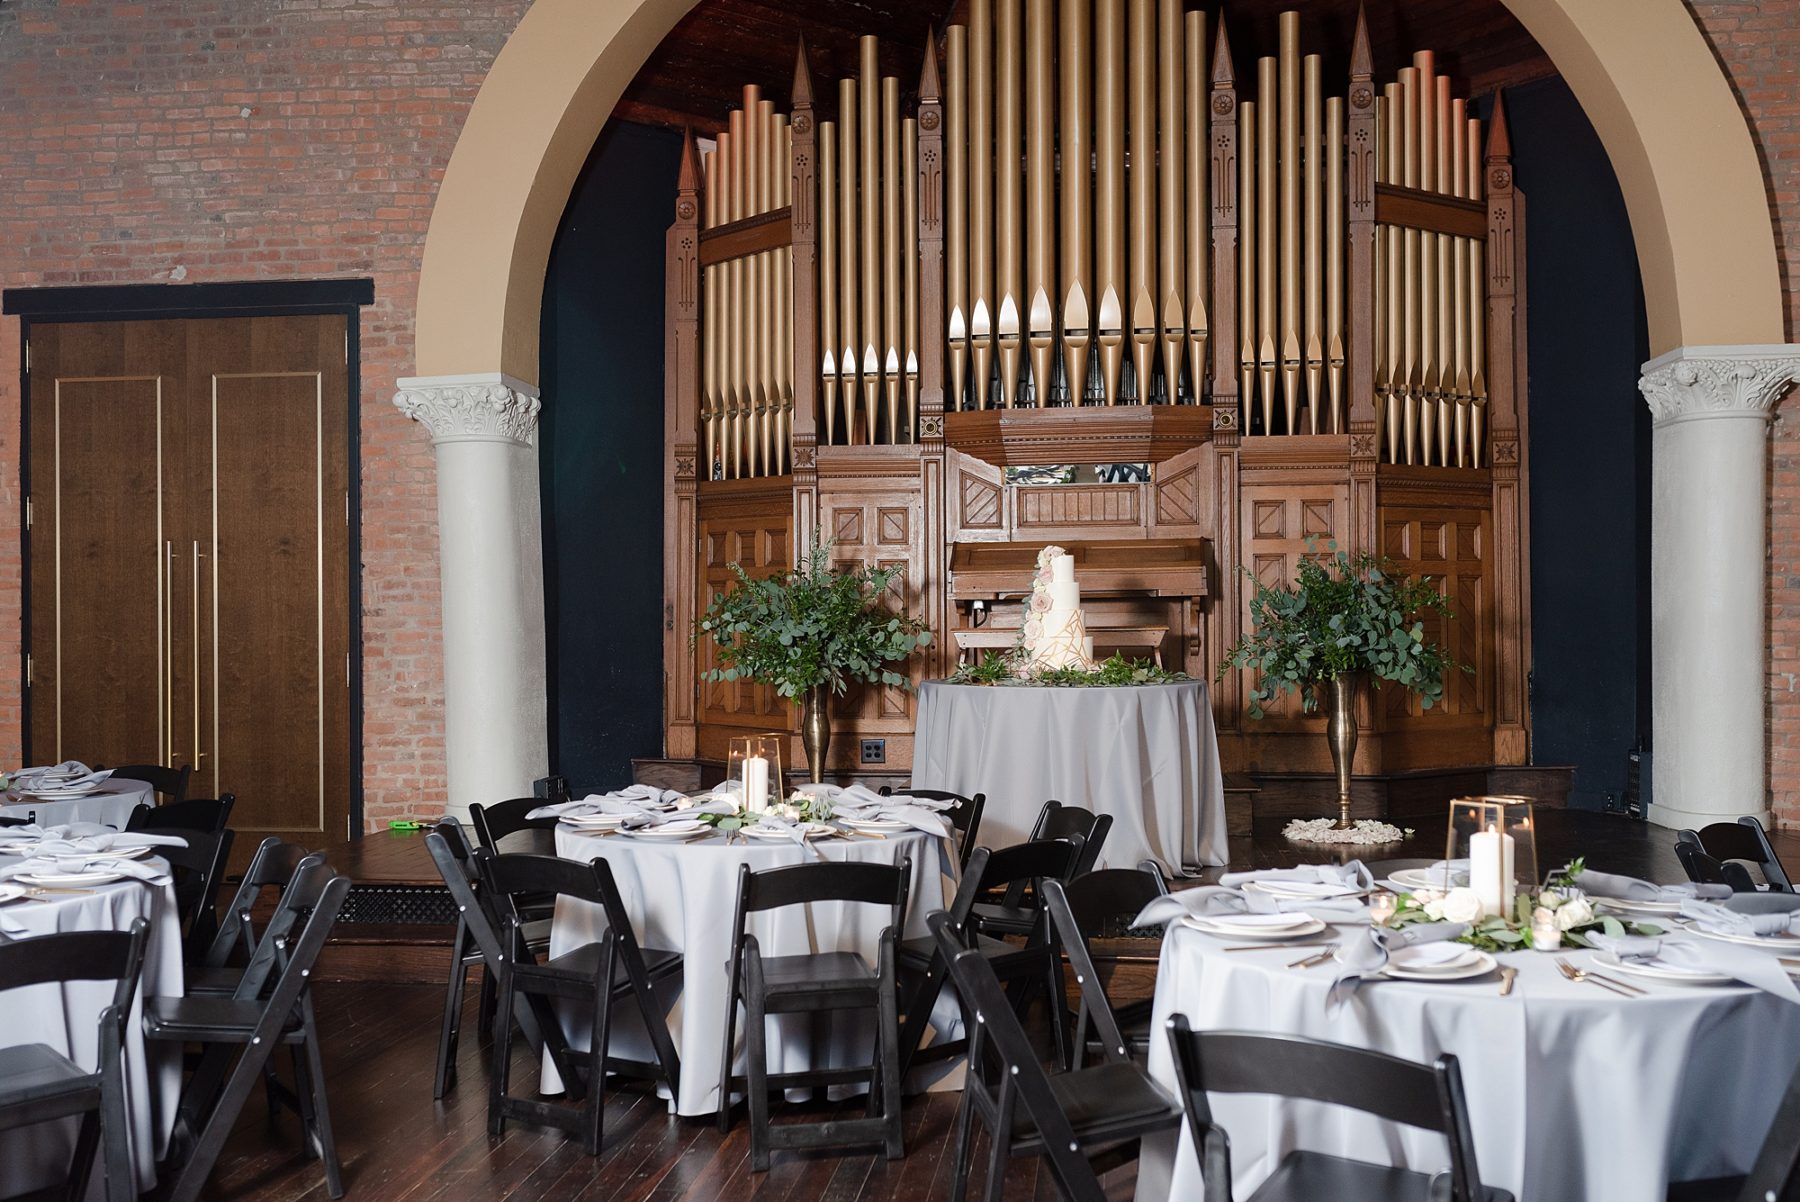 Modern and Southern Wedding at the Clementine featured on Nashville Bride Guide